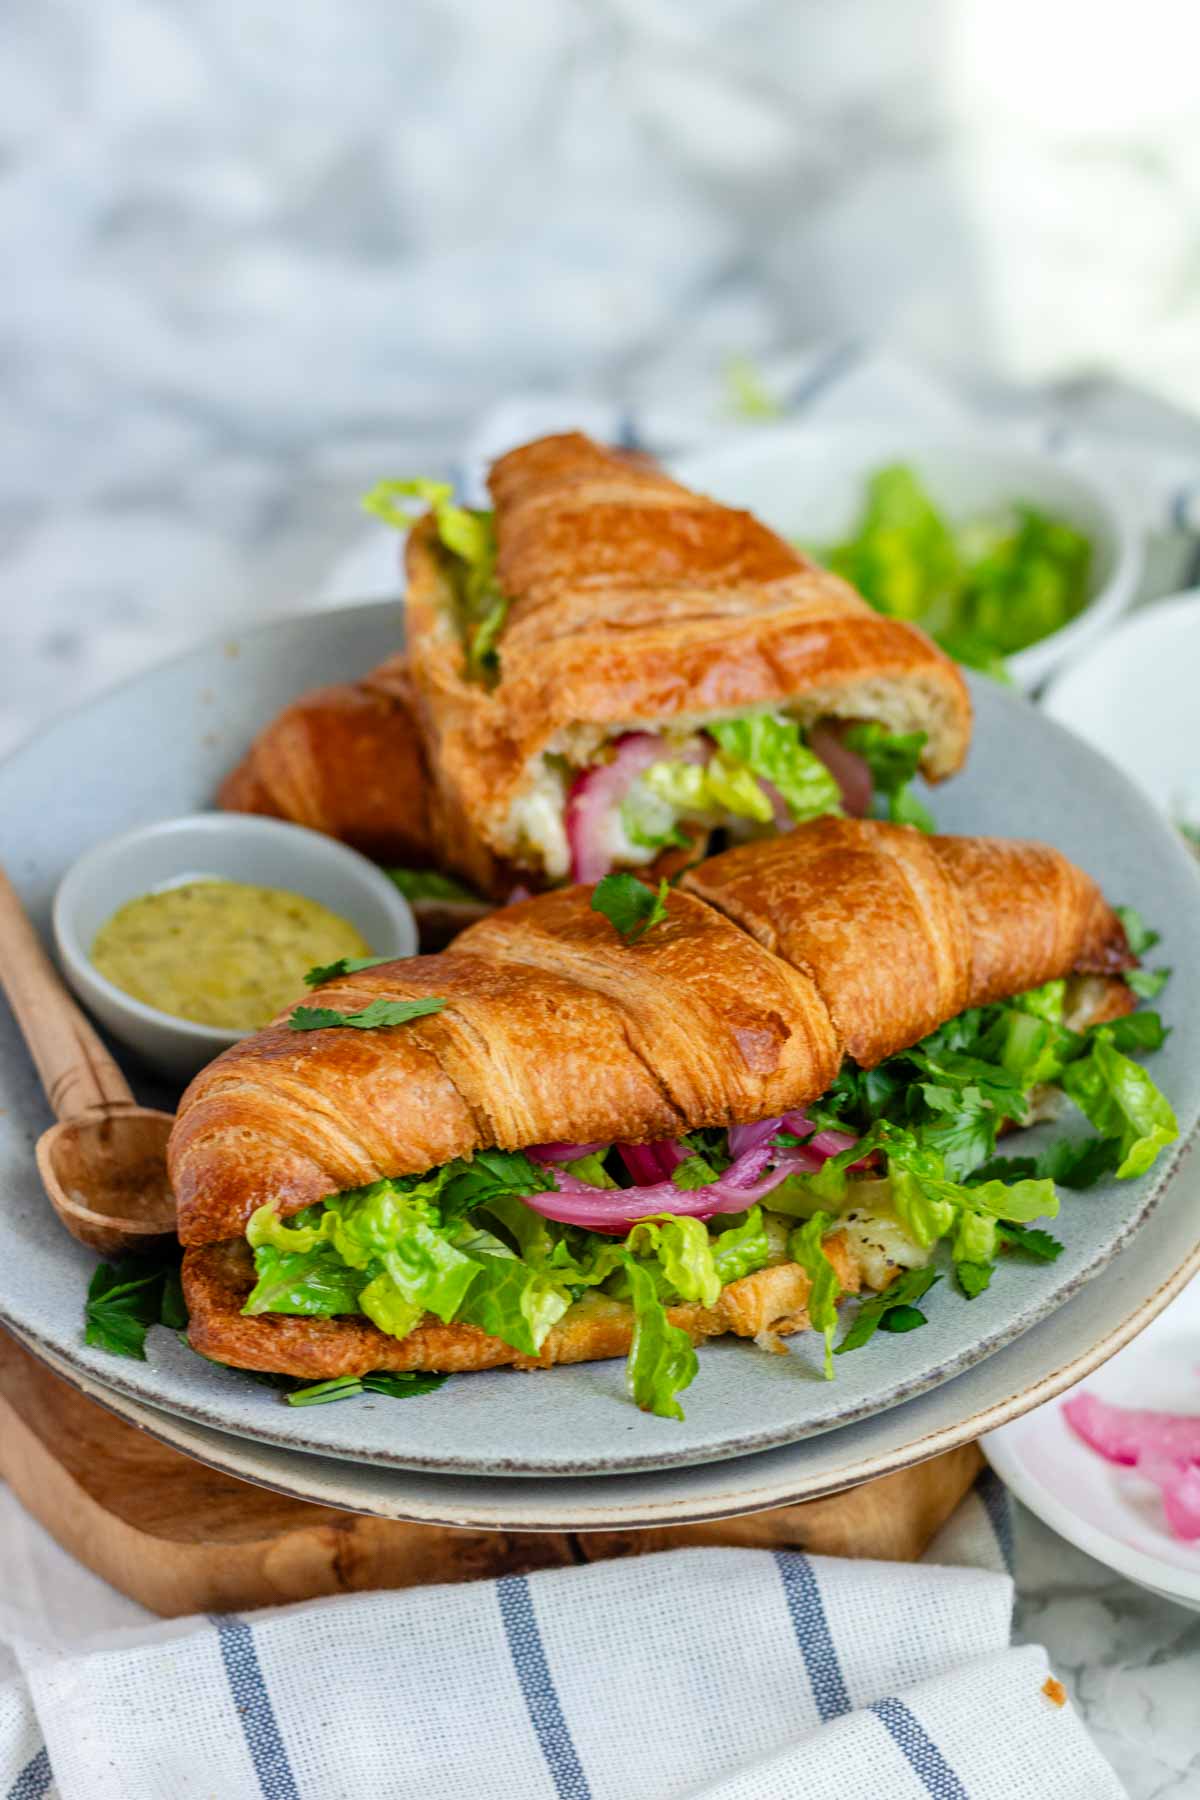 A croissant sandwich with cheese, lettuce, and pickled red onions.